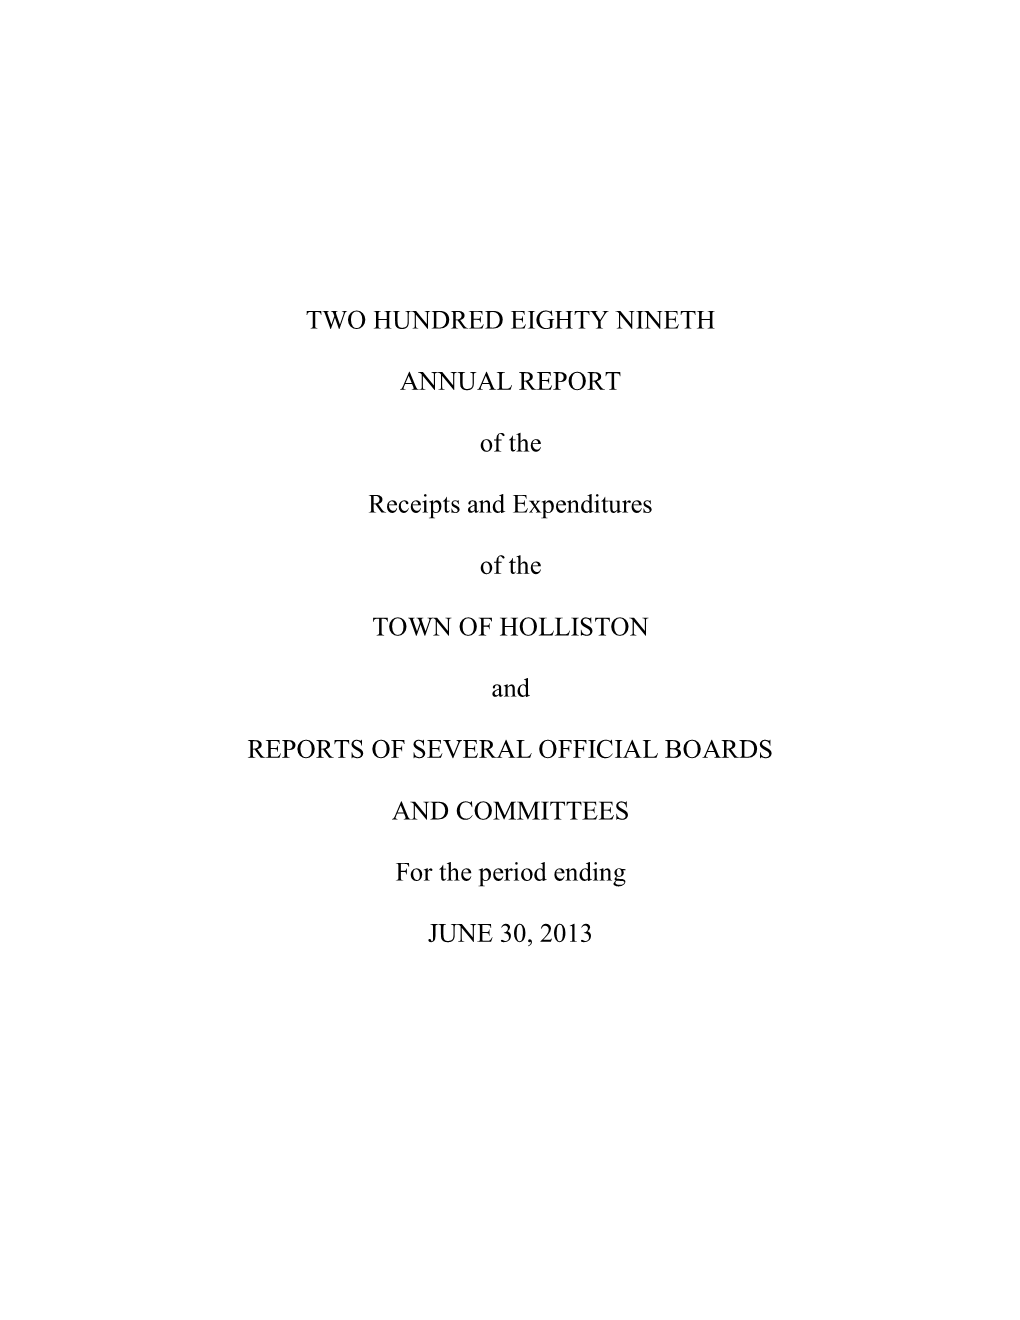 TWO HUNDRED EIGHTY NINETH ANNUAL REPORT of the Receipts